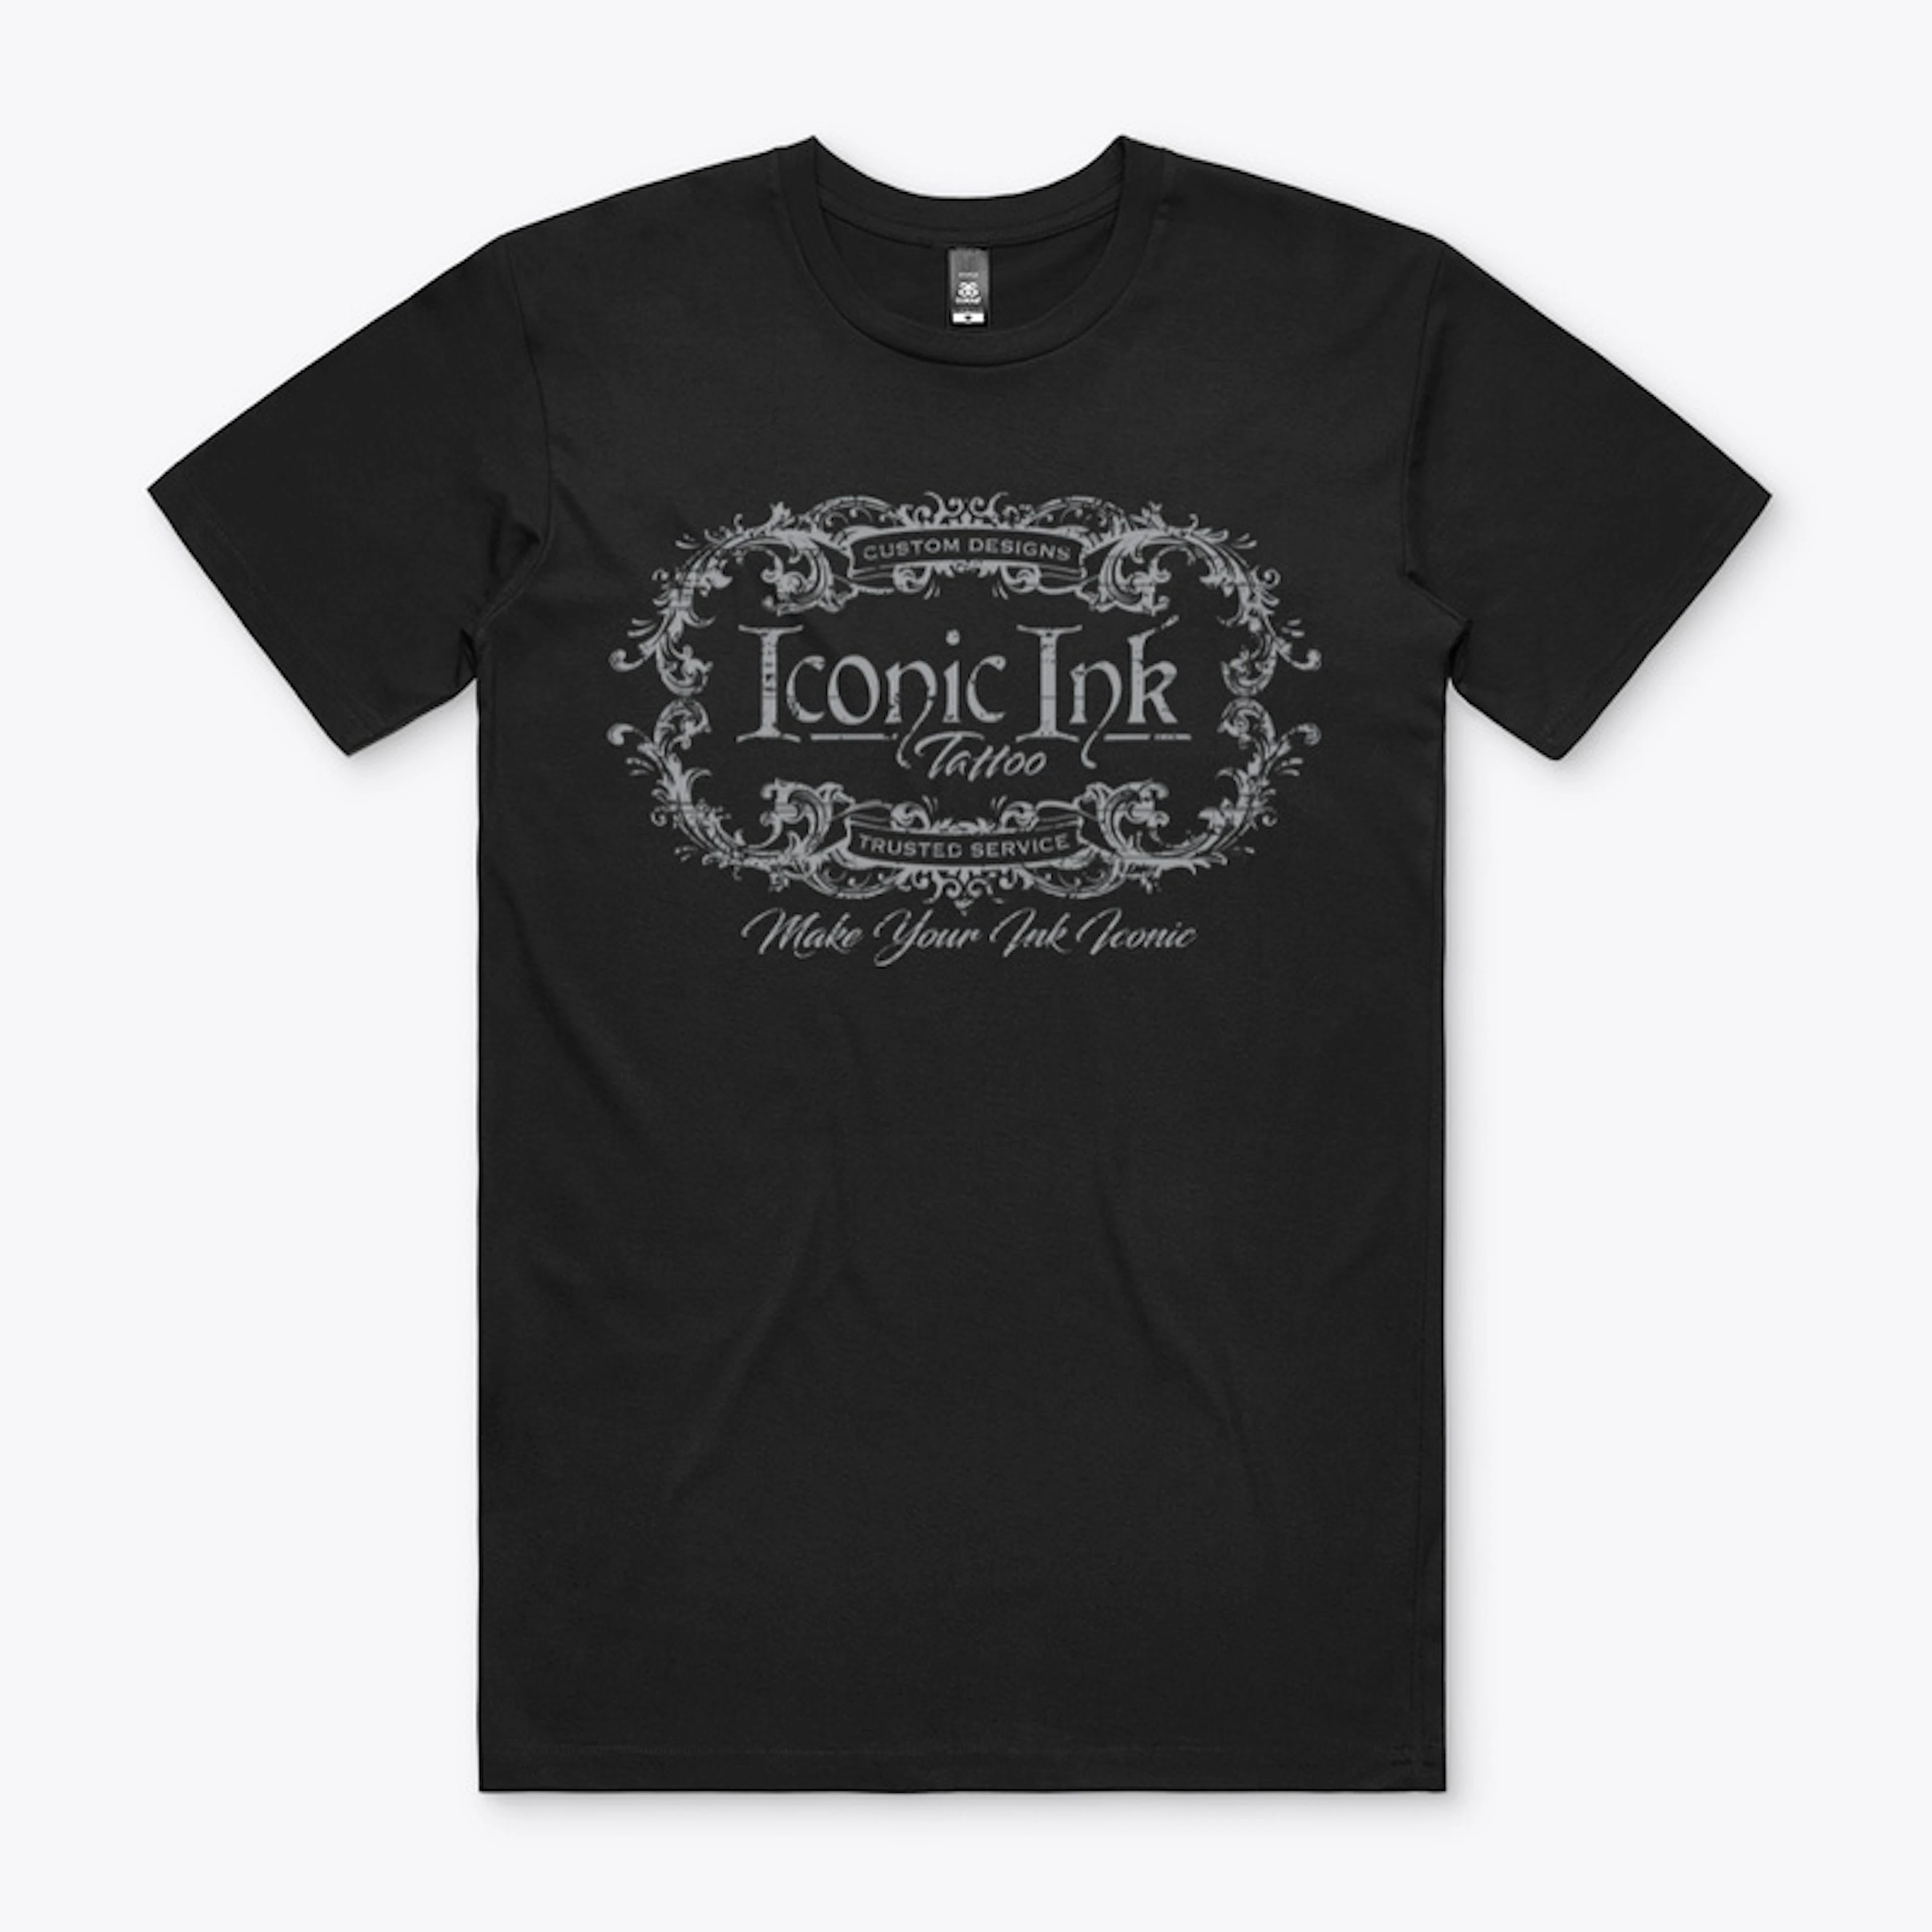 Iconic Ink T-Shirt